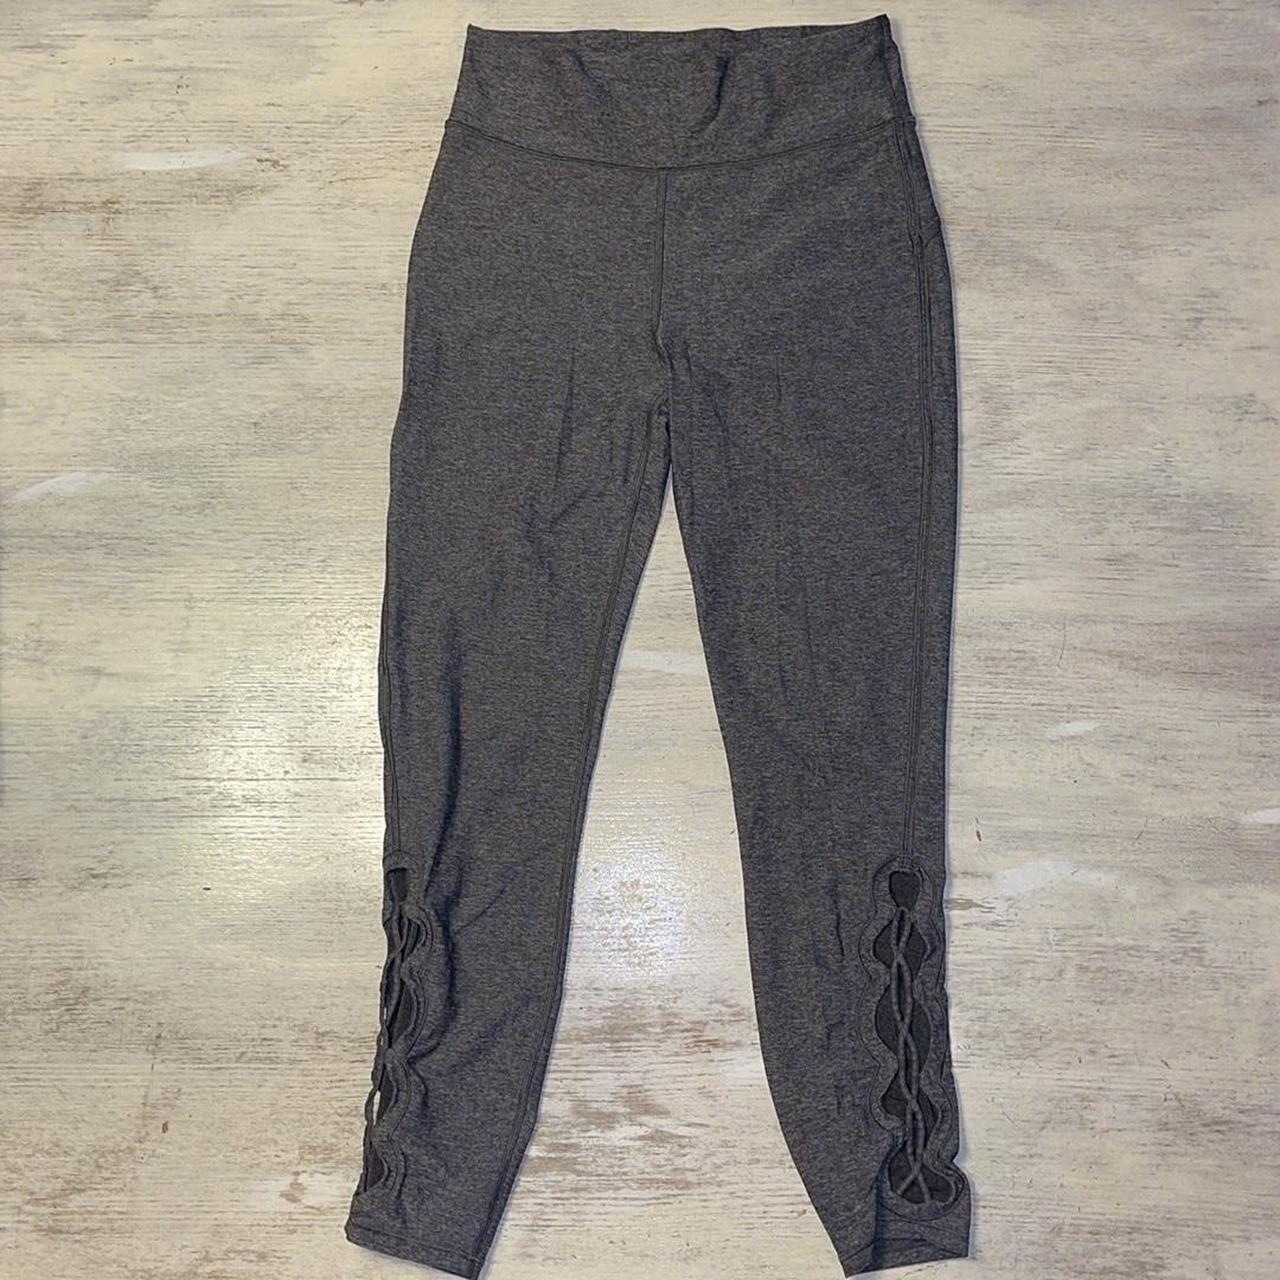 EUC Lululemon High Rise Grey Space Dye Ballerina Lace up Detail Calf Leggings  Tights Tied To it 7/8 style Size 8